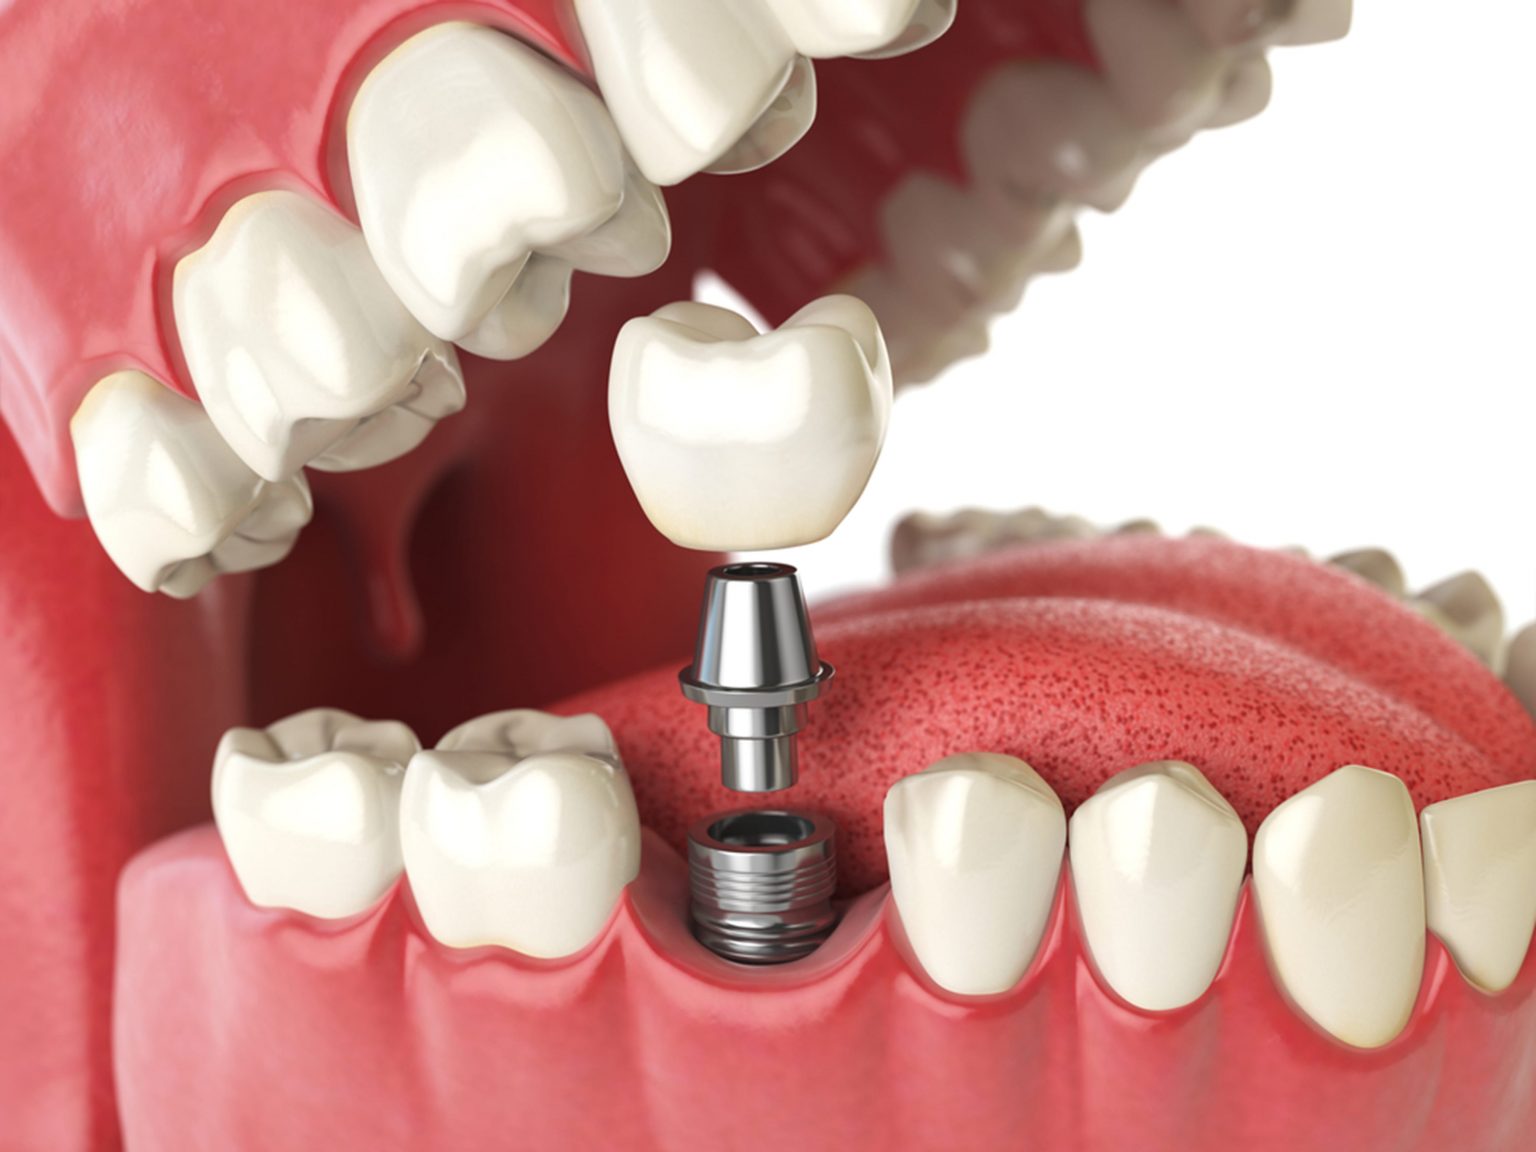 types of dental implants which one is best for you